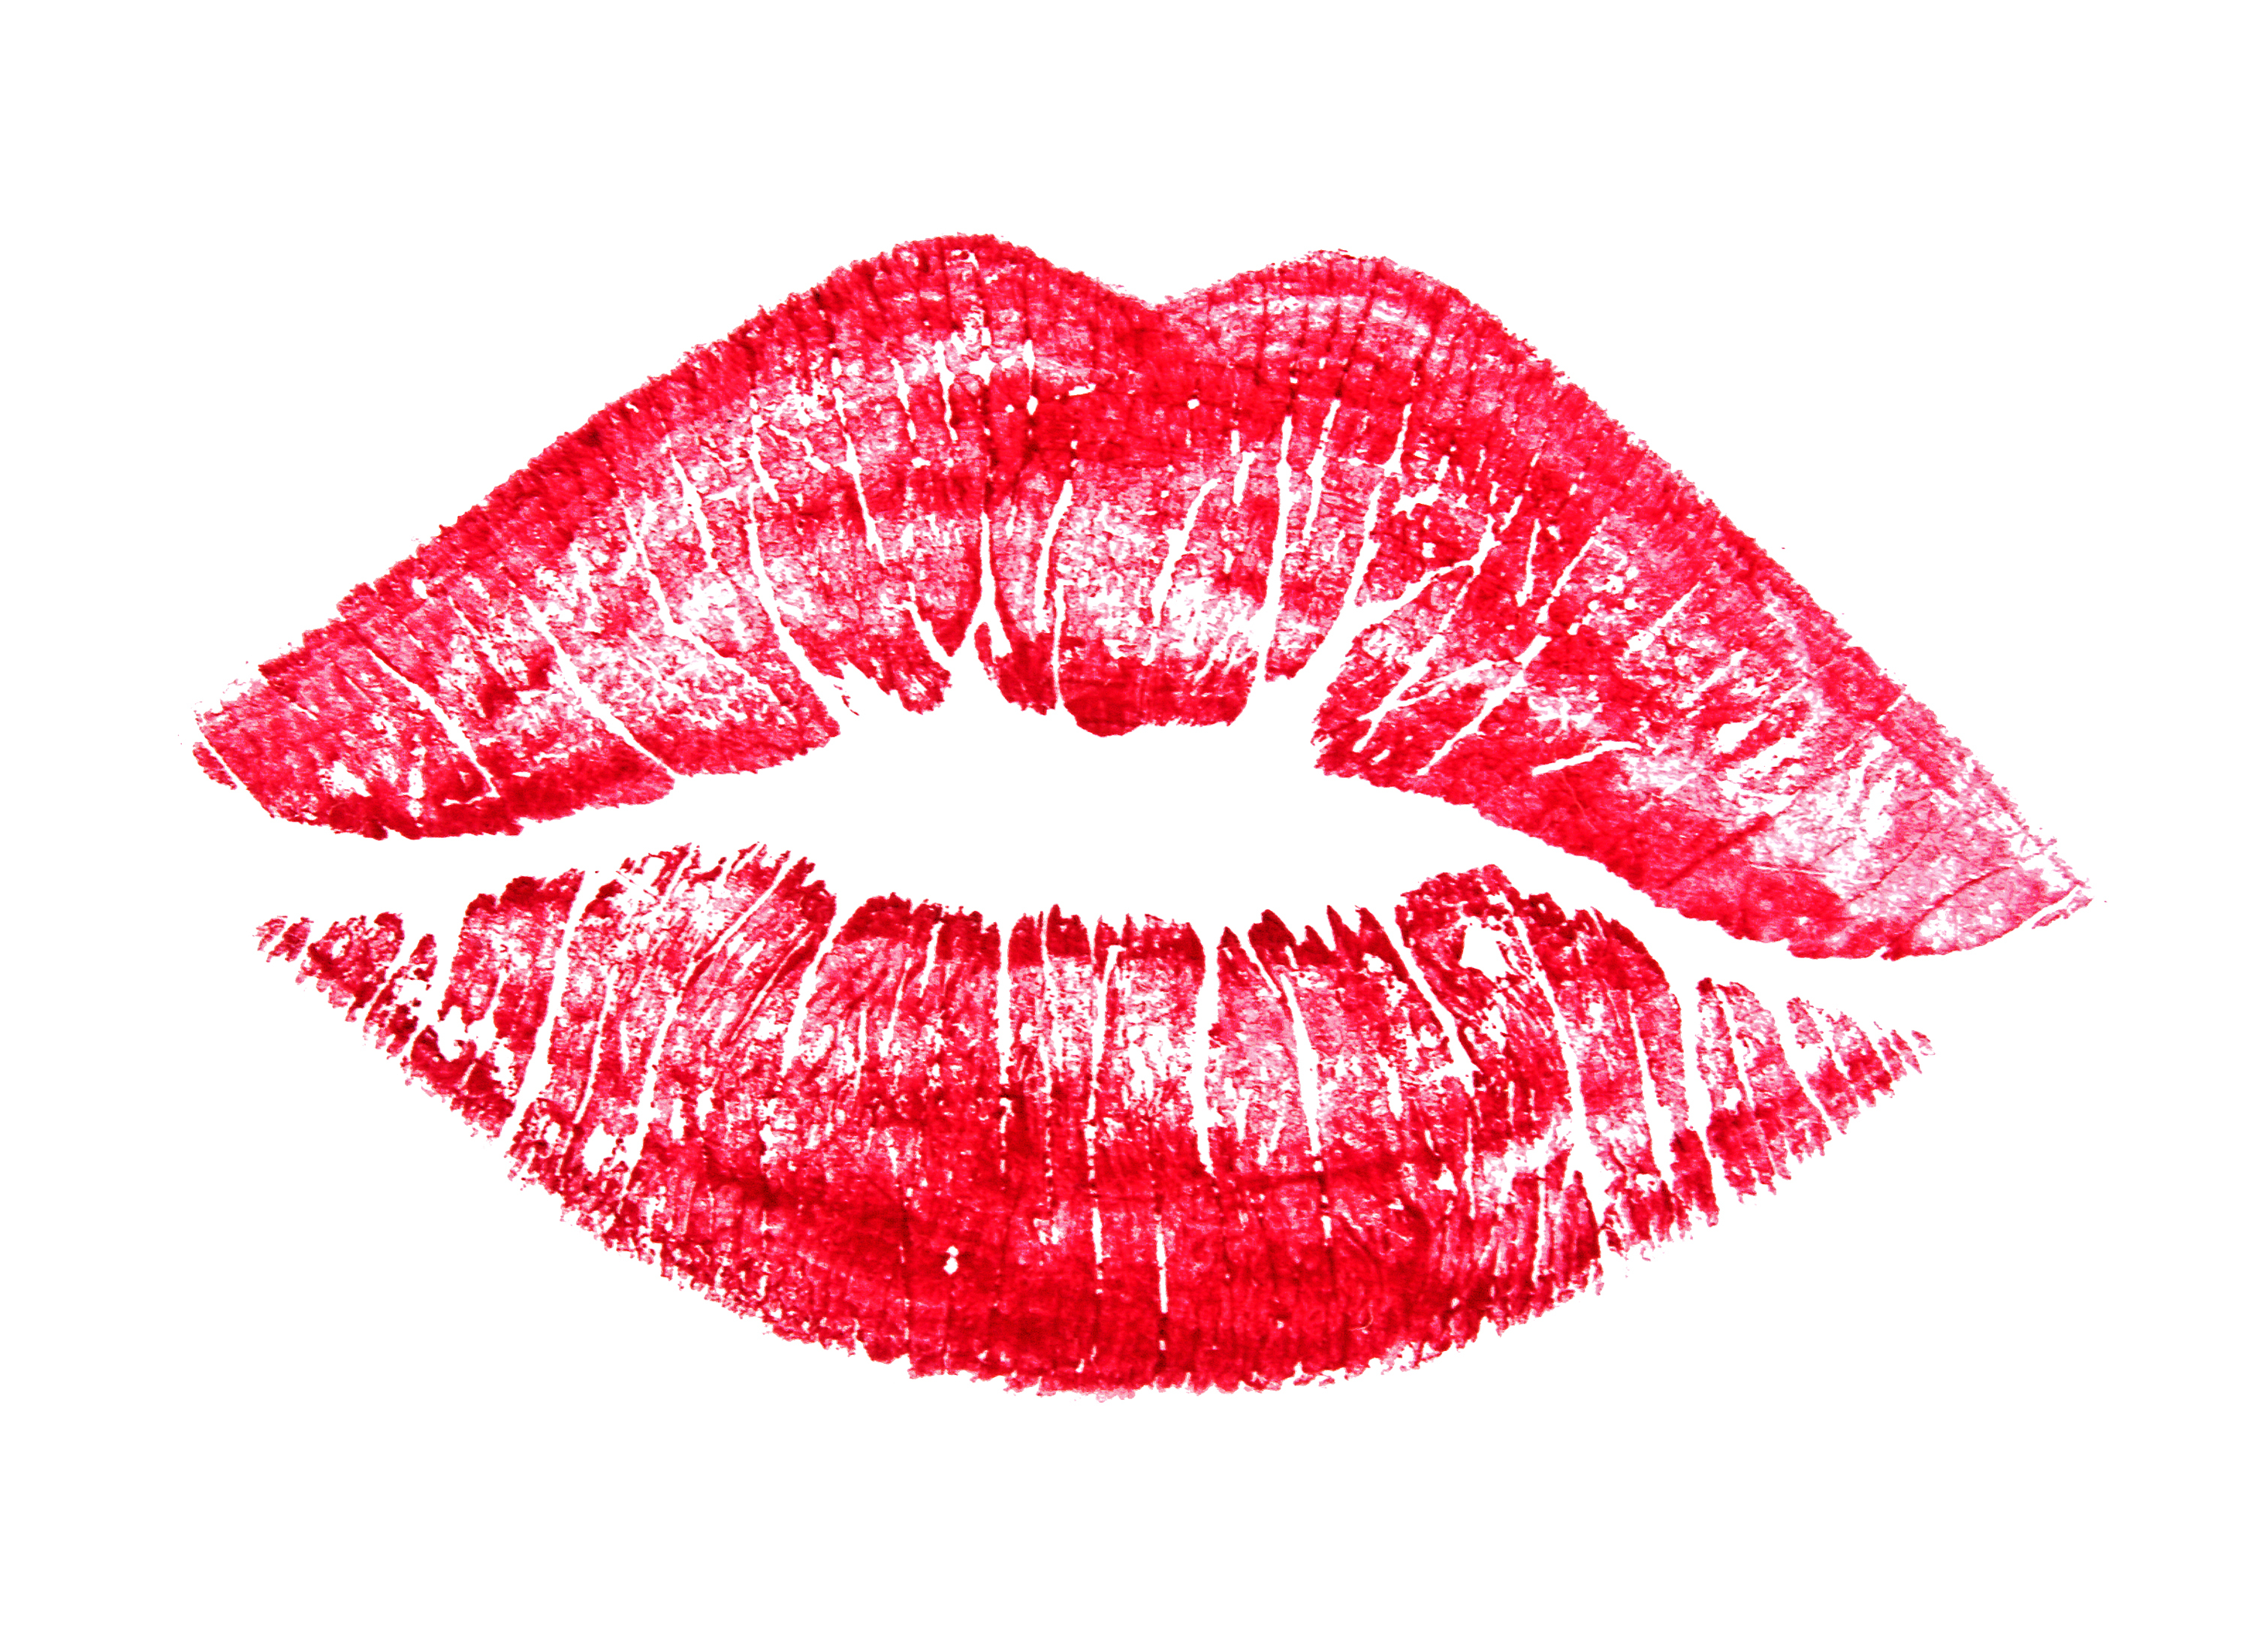 Red Lips Kiss Png & Free Red Lips Kiss.png Transparent Images #4166.